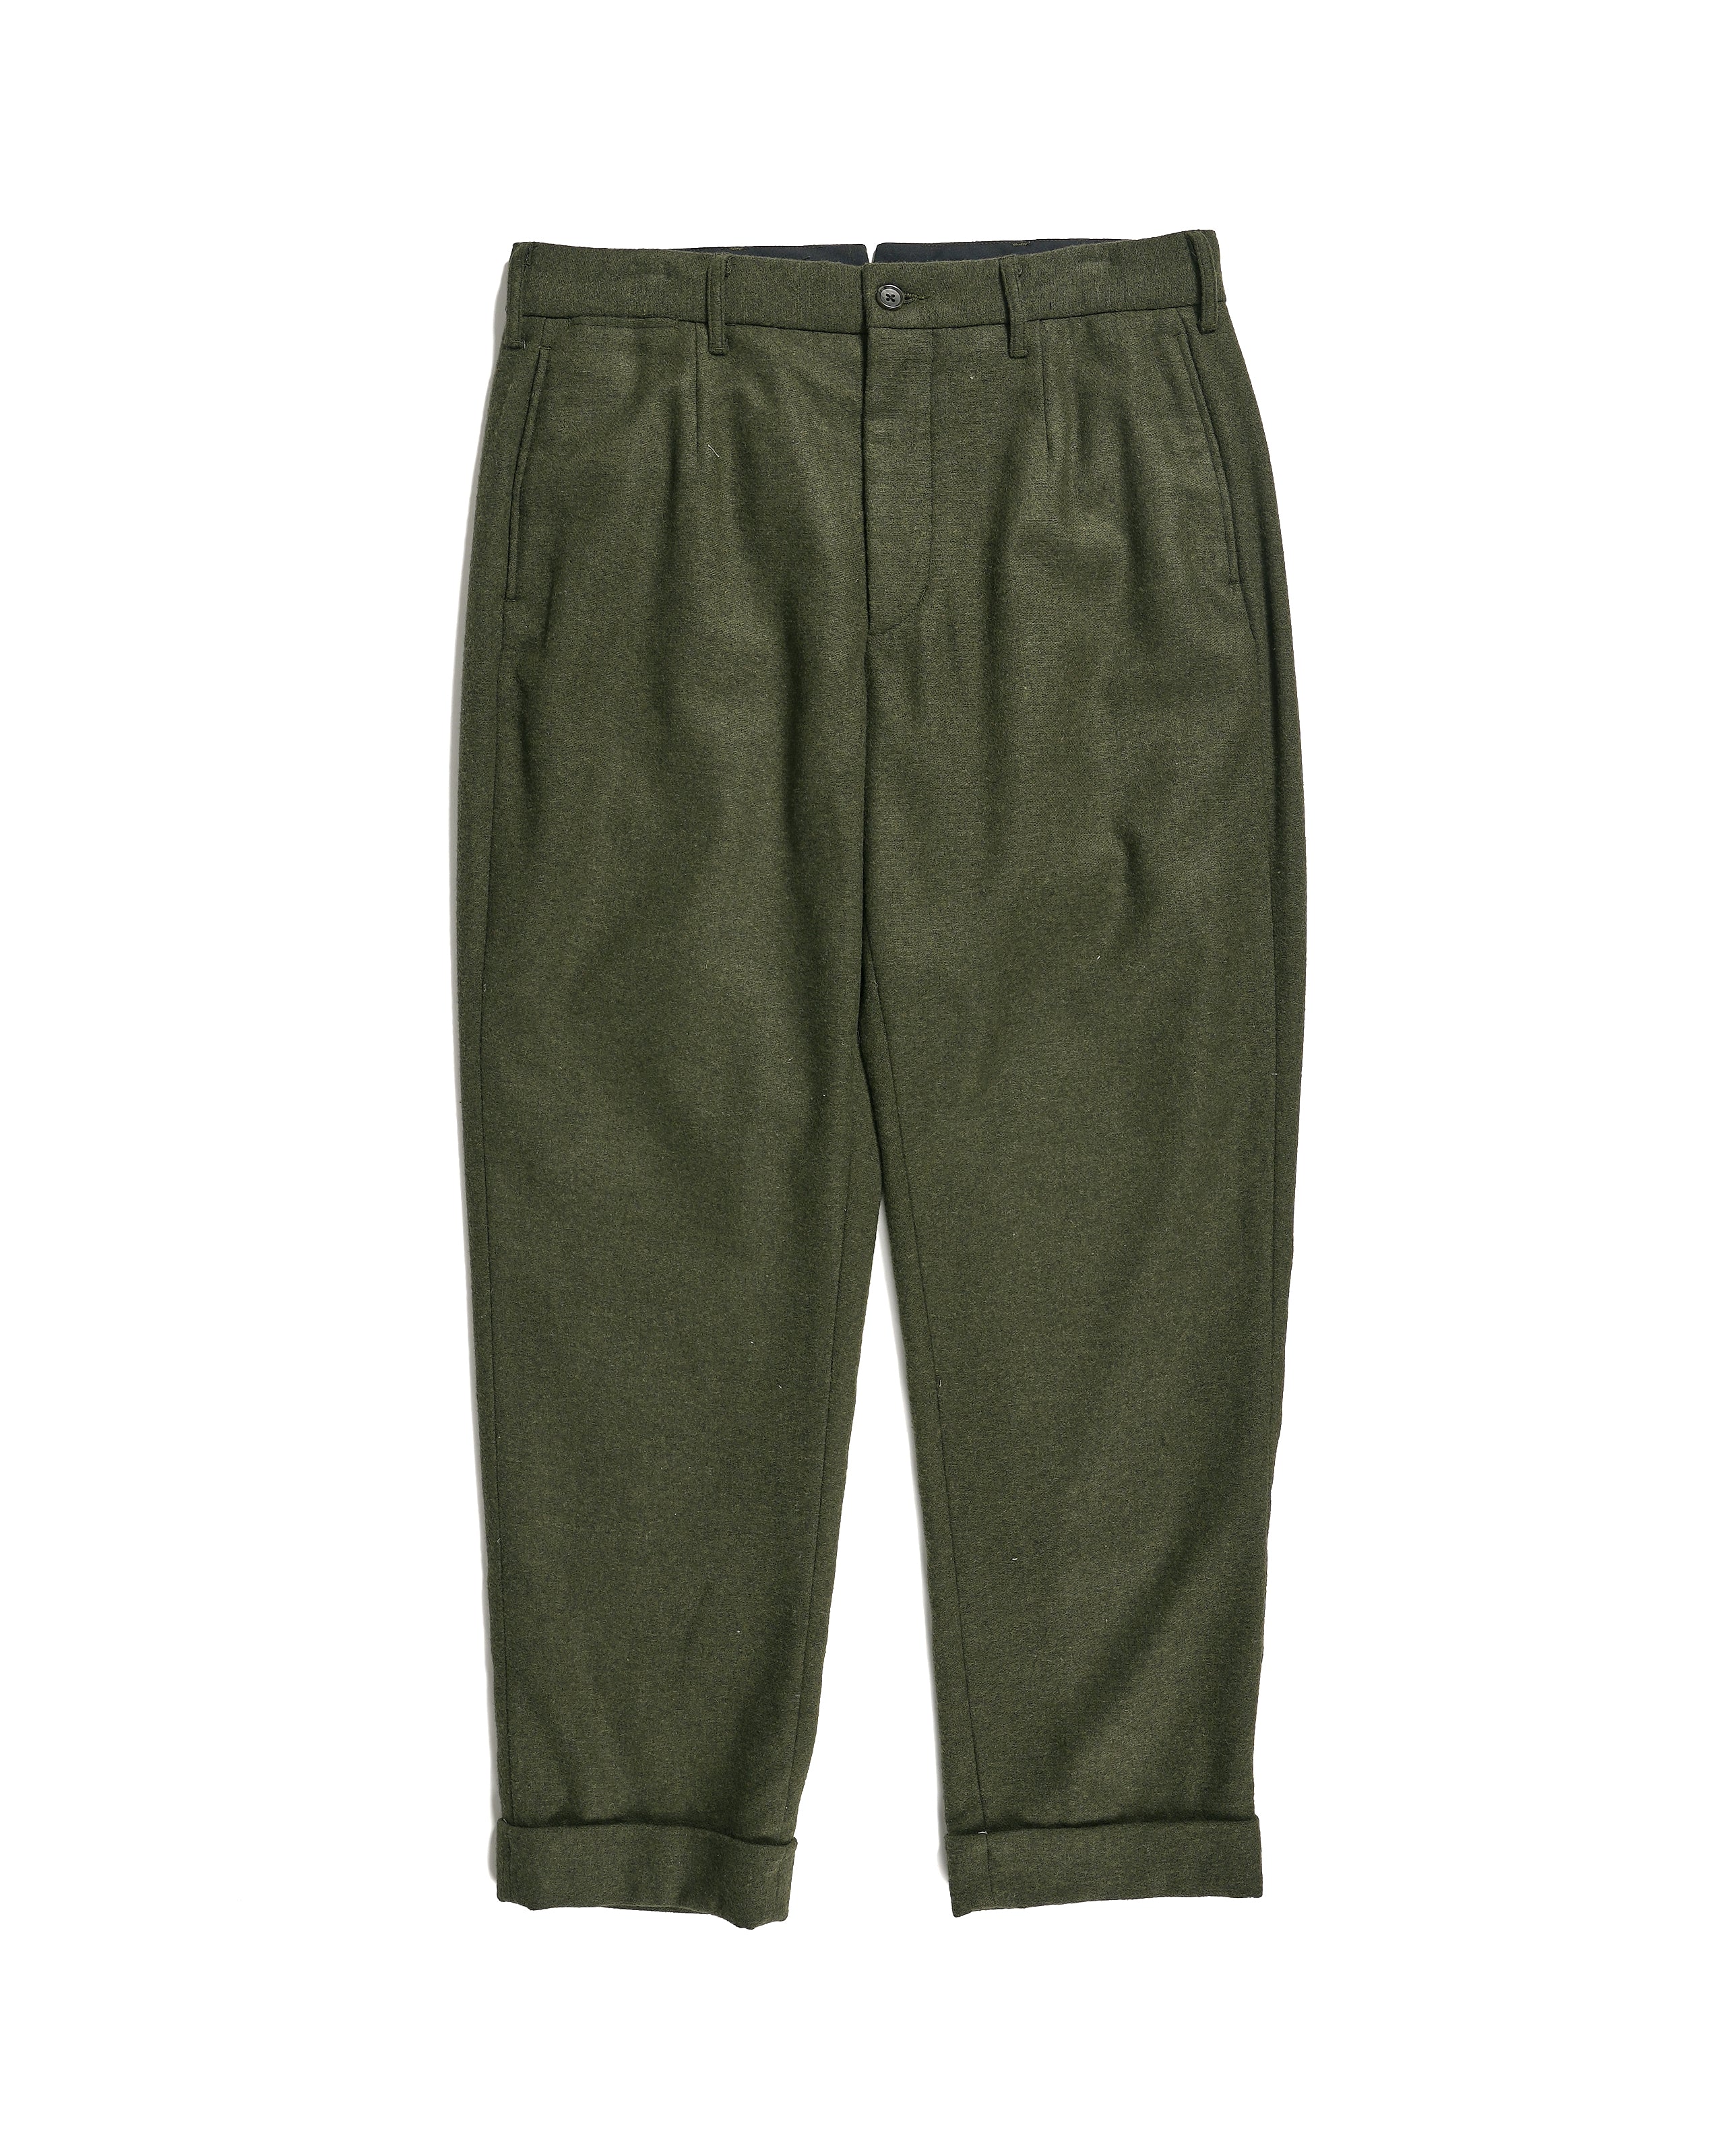 Andover Pant - Olive Solid Poly Wool Flannel